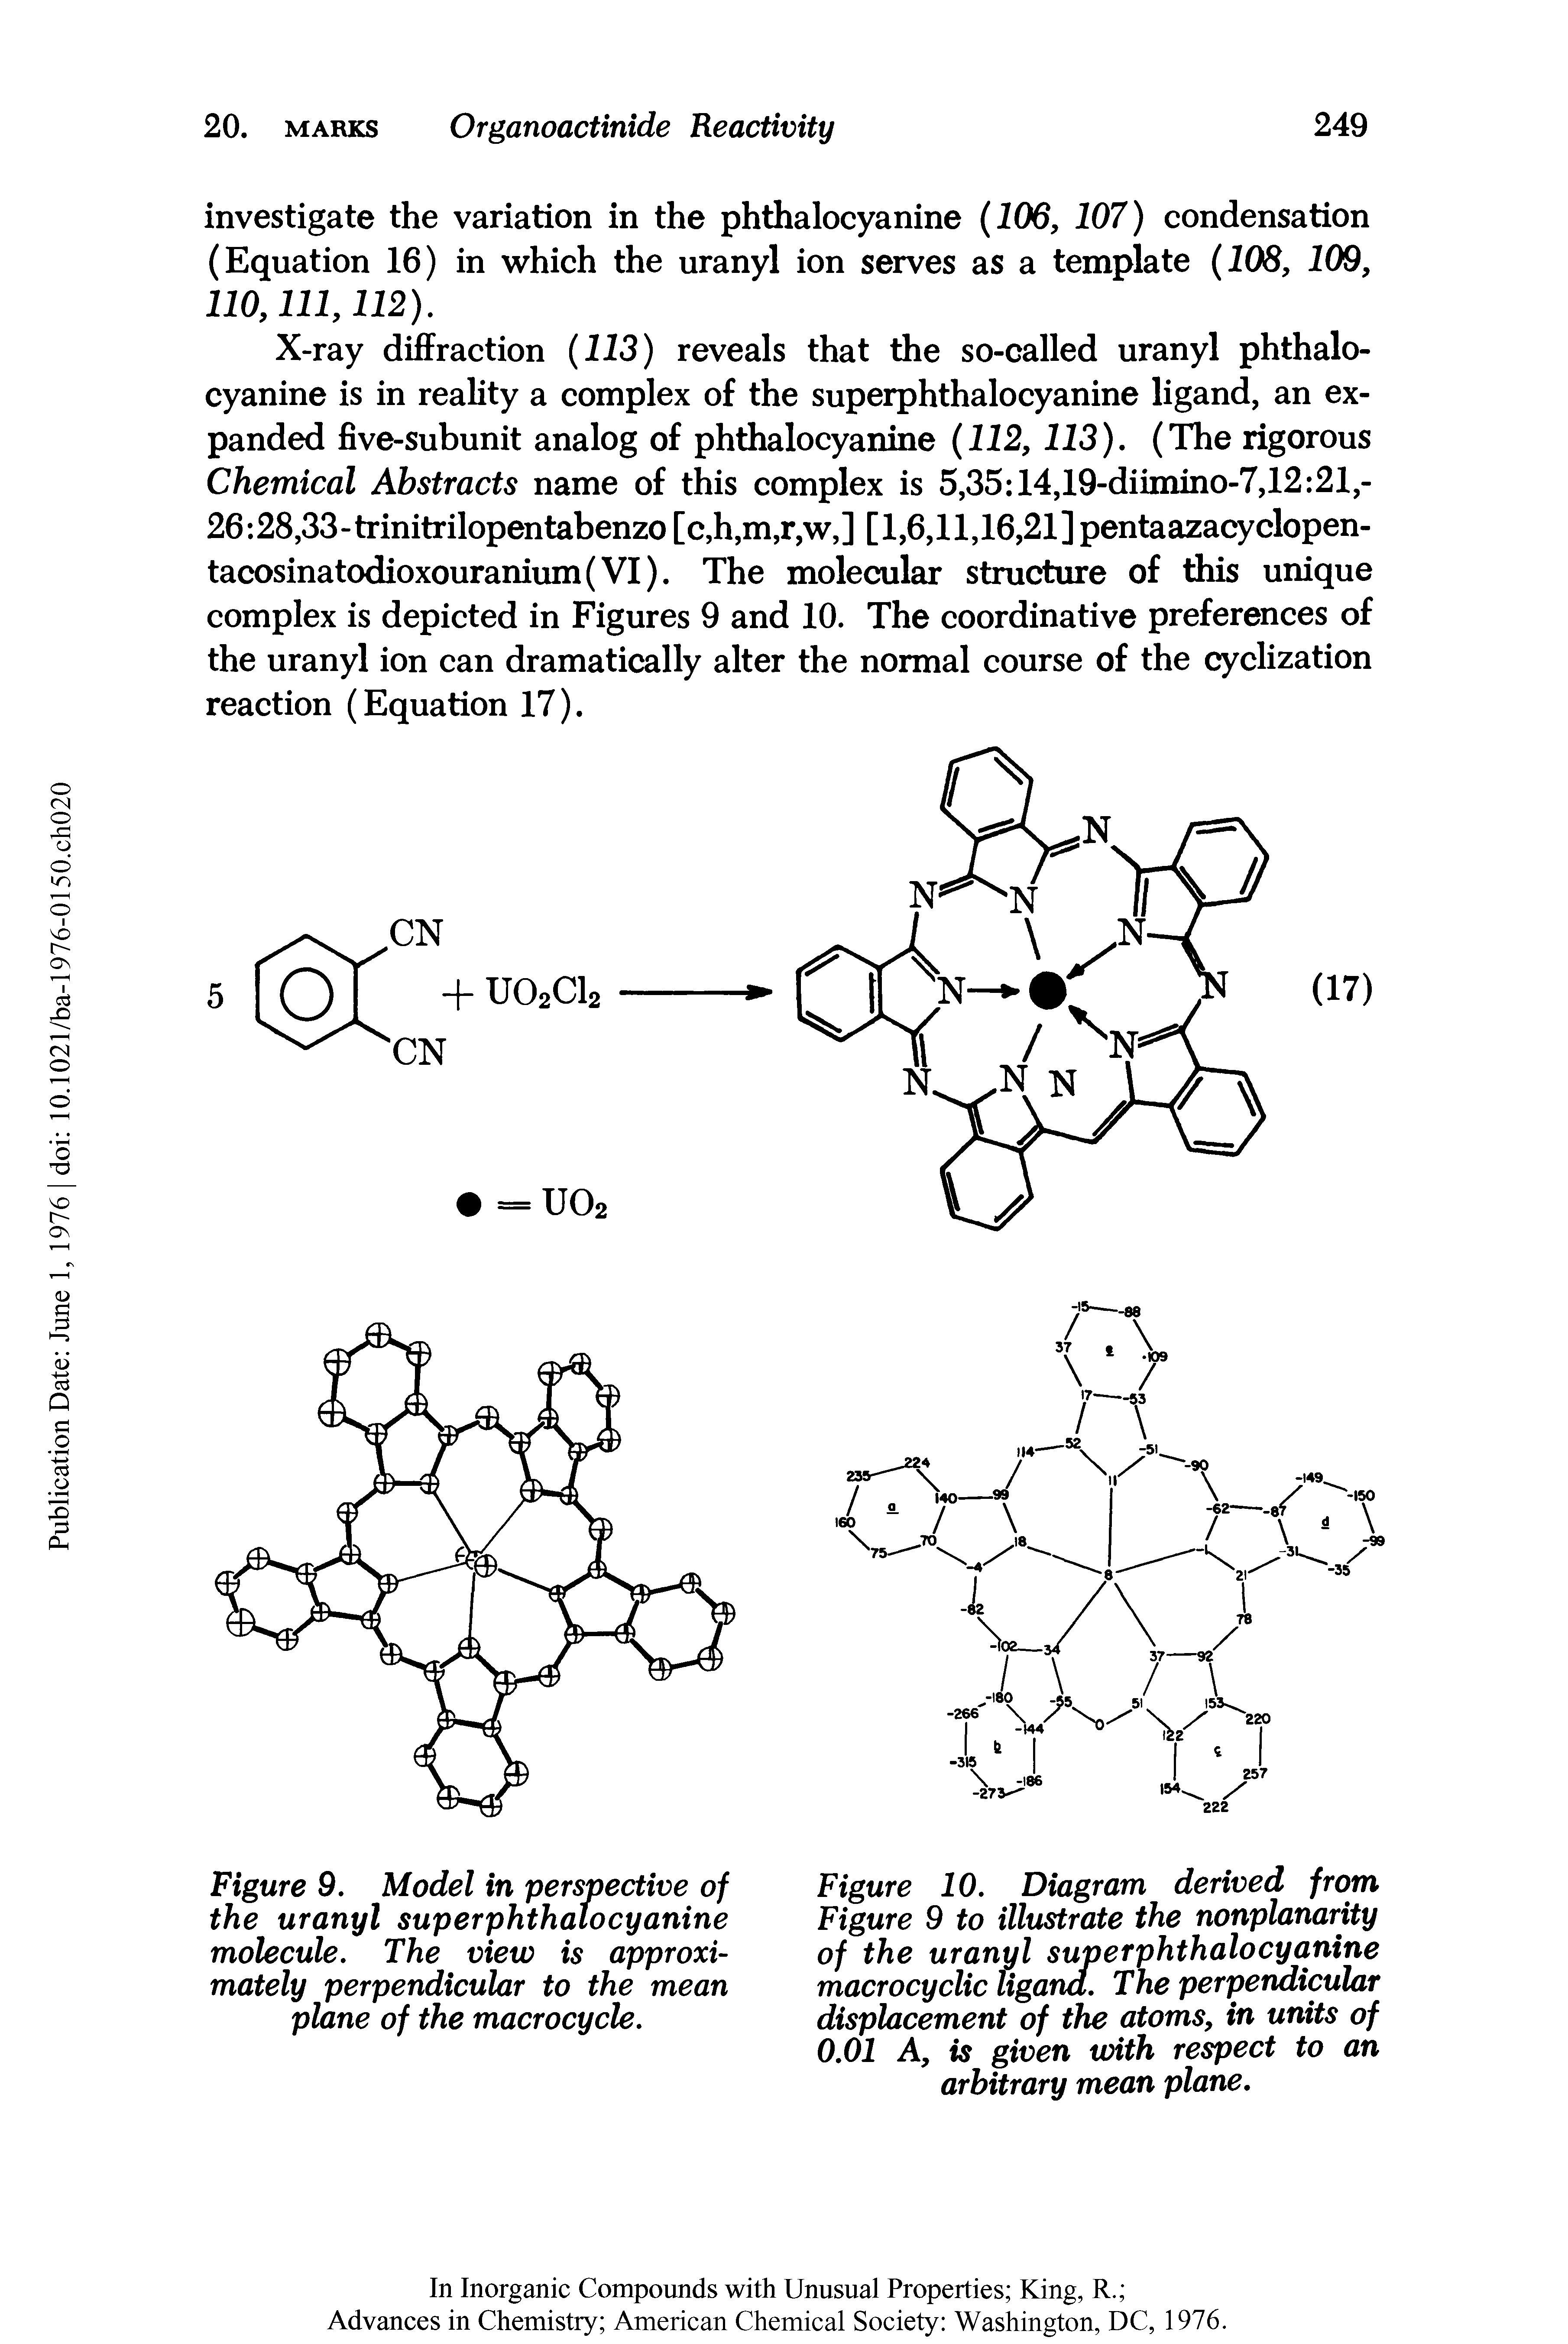 Figure 10. Diagram derived from Figure 9 to illustrate the nonplanarity of the uranyl superphthalocyanine macrocyclic ligand. The perpendicular displacement of the atoms, in units of 0.01 A, is given with respect to an arbitrary mean plane.